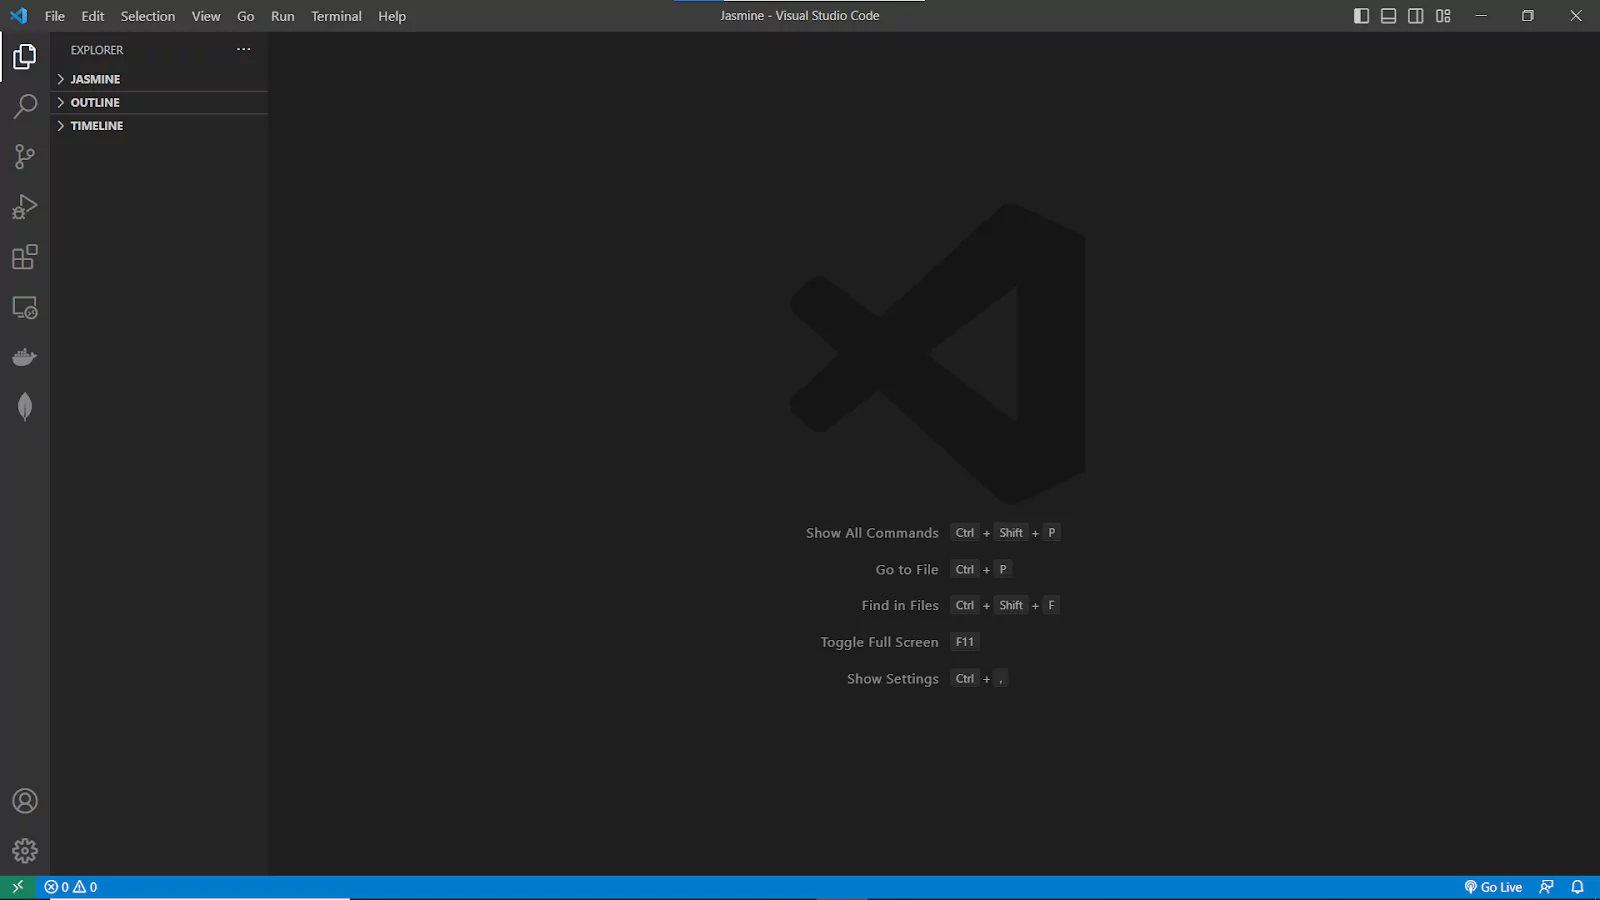 Create a project folder and open it on Visual Studio Code